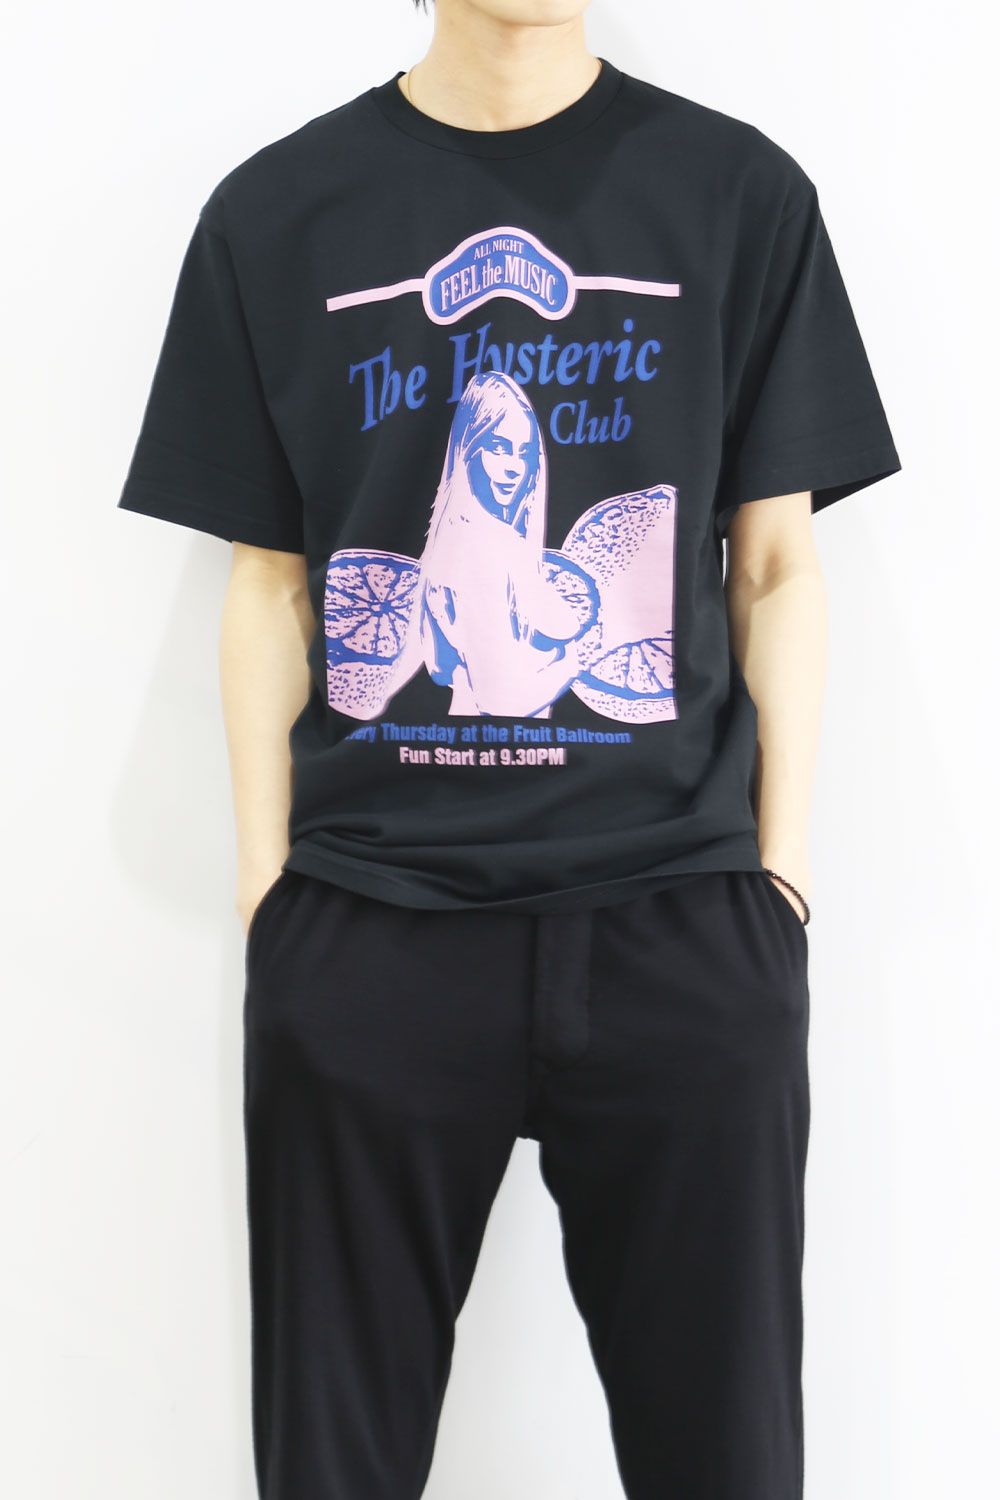 HYSTERIC GLAMOUR ‘PRIVATE CLUB’ Tシャツ M